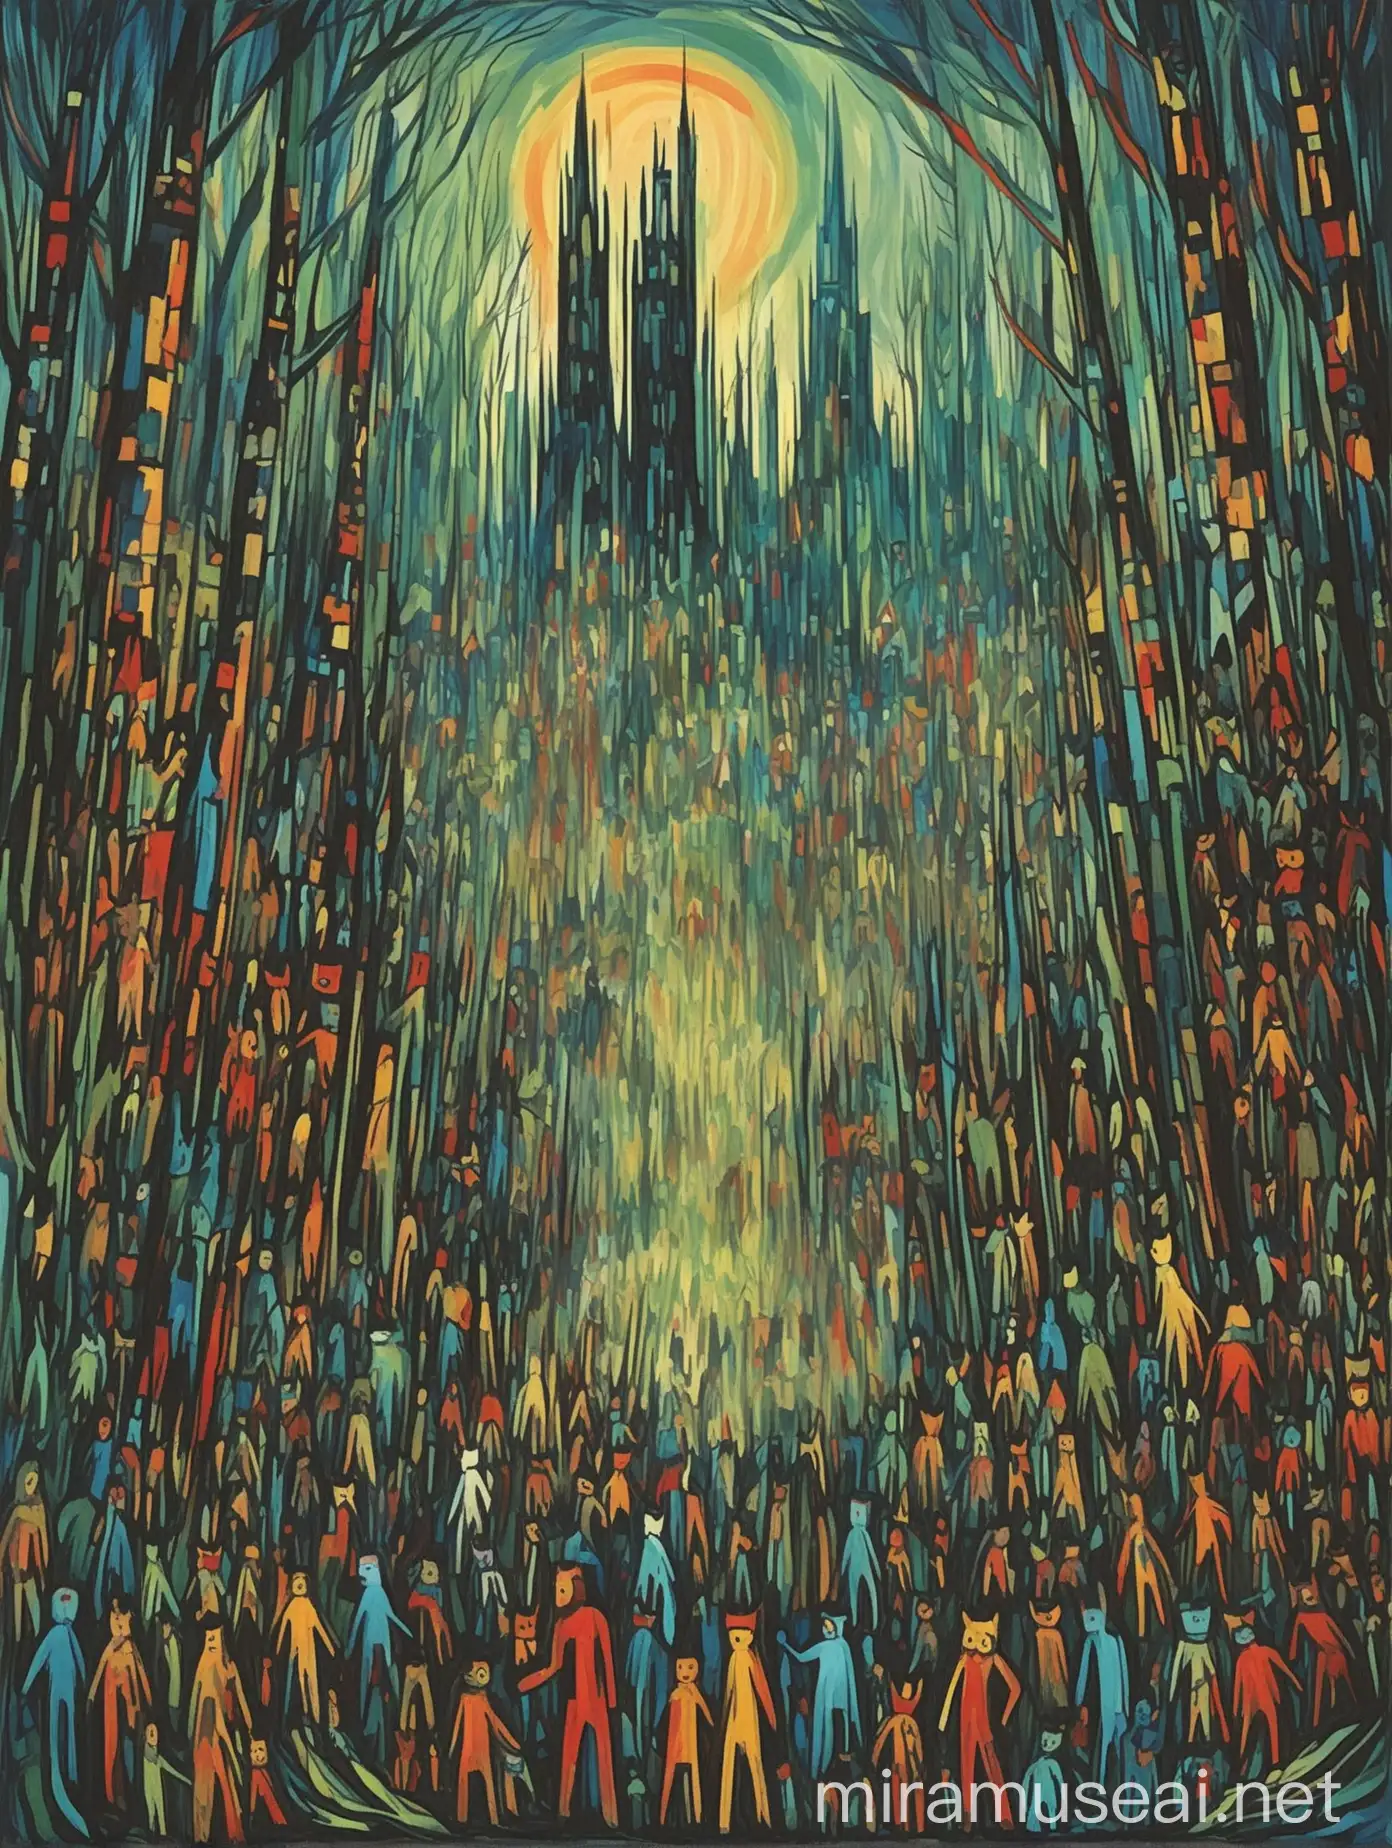 Expressionistic Forest with Wild People and Towers